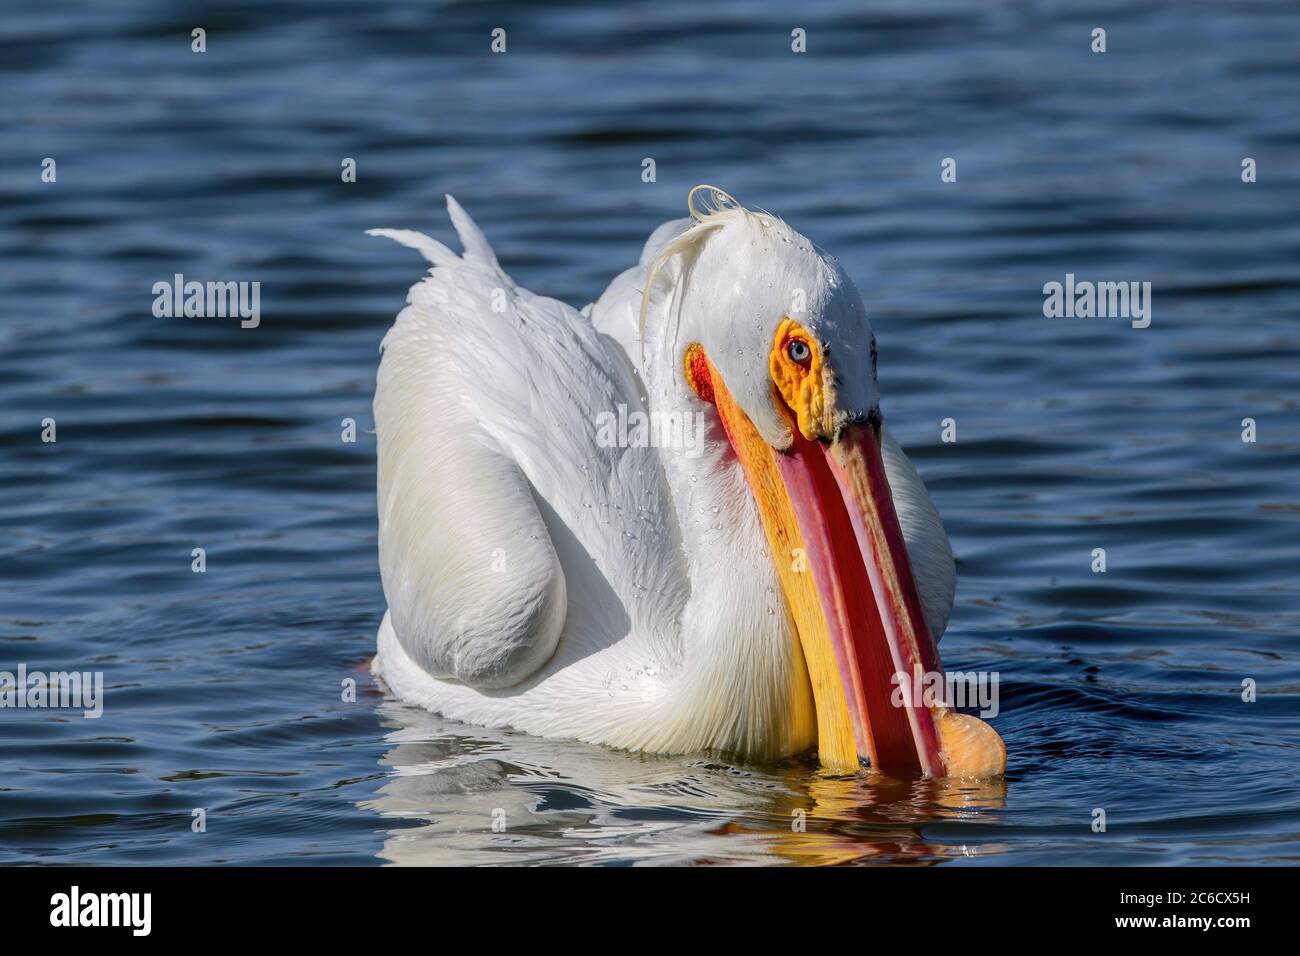 A nice close up of a blue-eyed American White Pelican at the height of the breeding season, scooping up food into his colorful pink and orange bill. Stock Photo